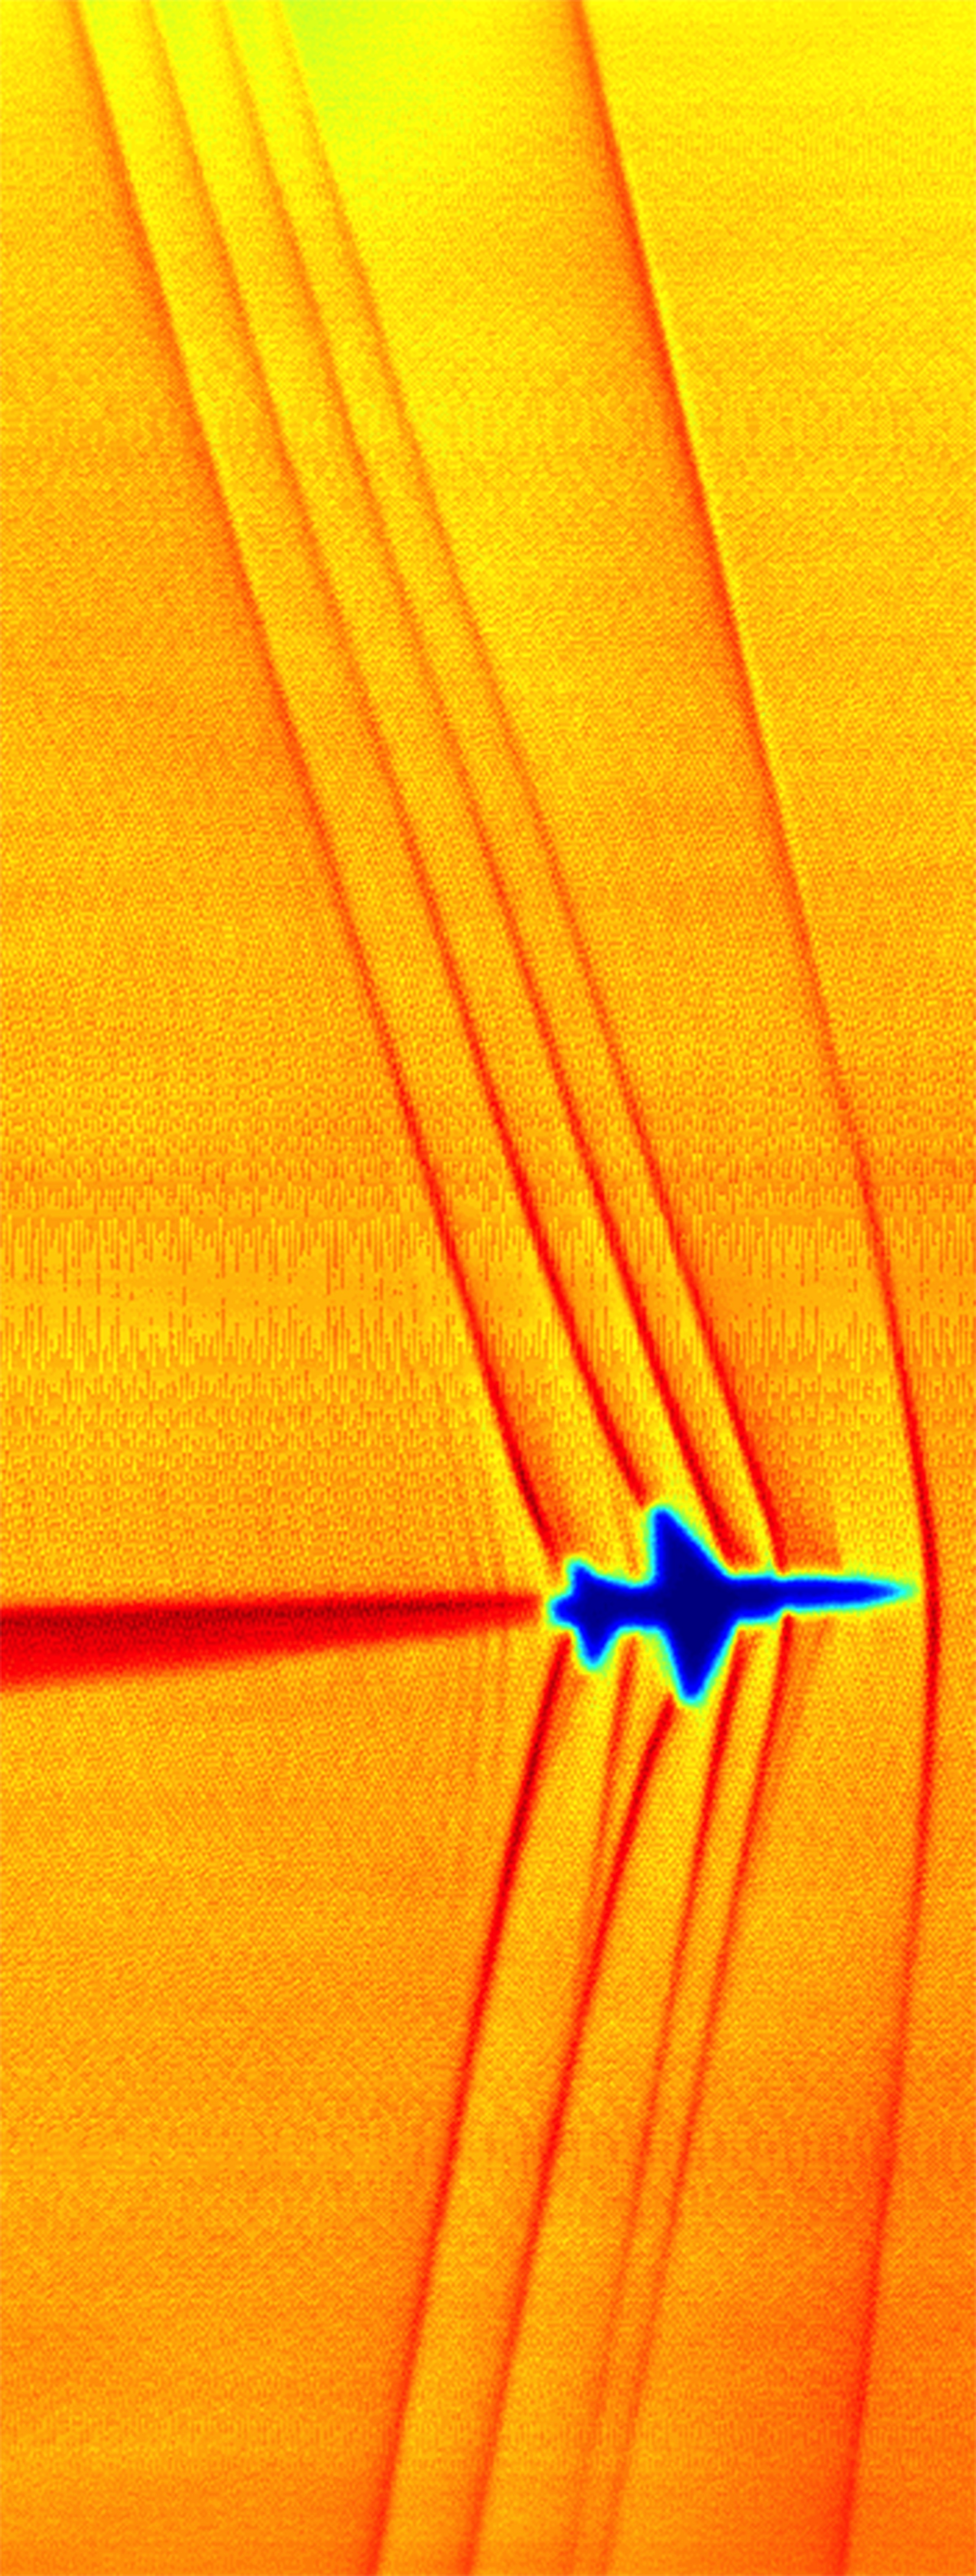 This schlieren image of shock waves created by a T-38C in supersonic flight was captured using the sun’s edge as a light source 